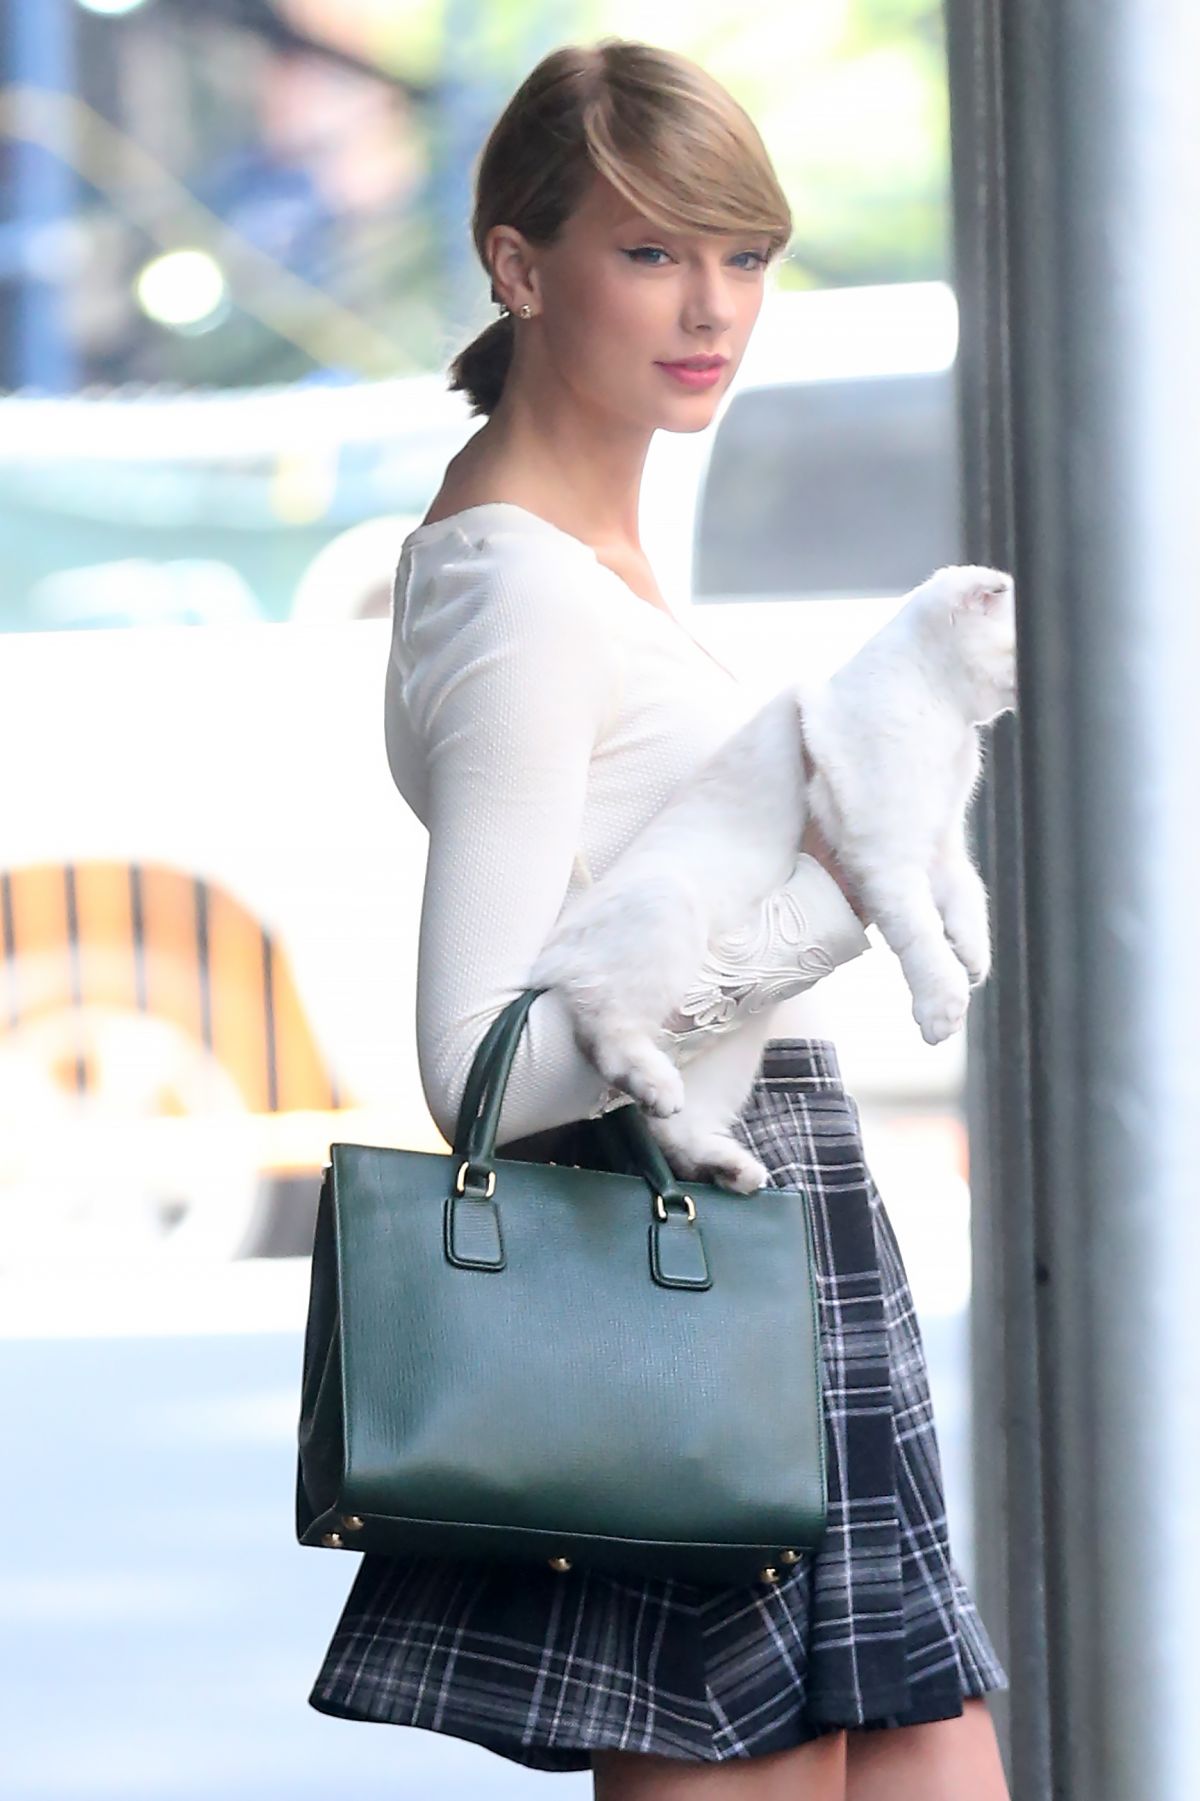 TAYLOR SWIFT in Stockings Out and About in New York – HawtCelebs